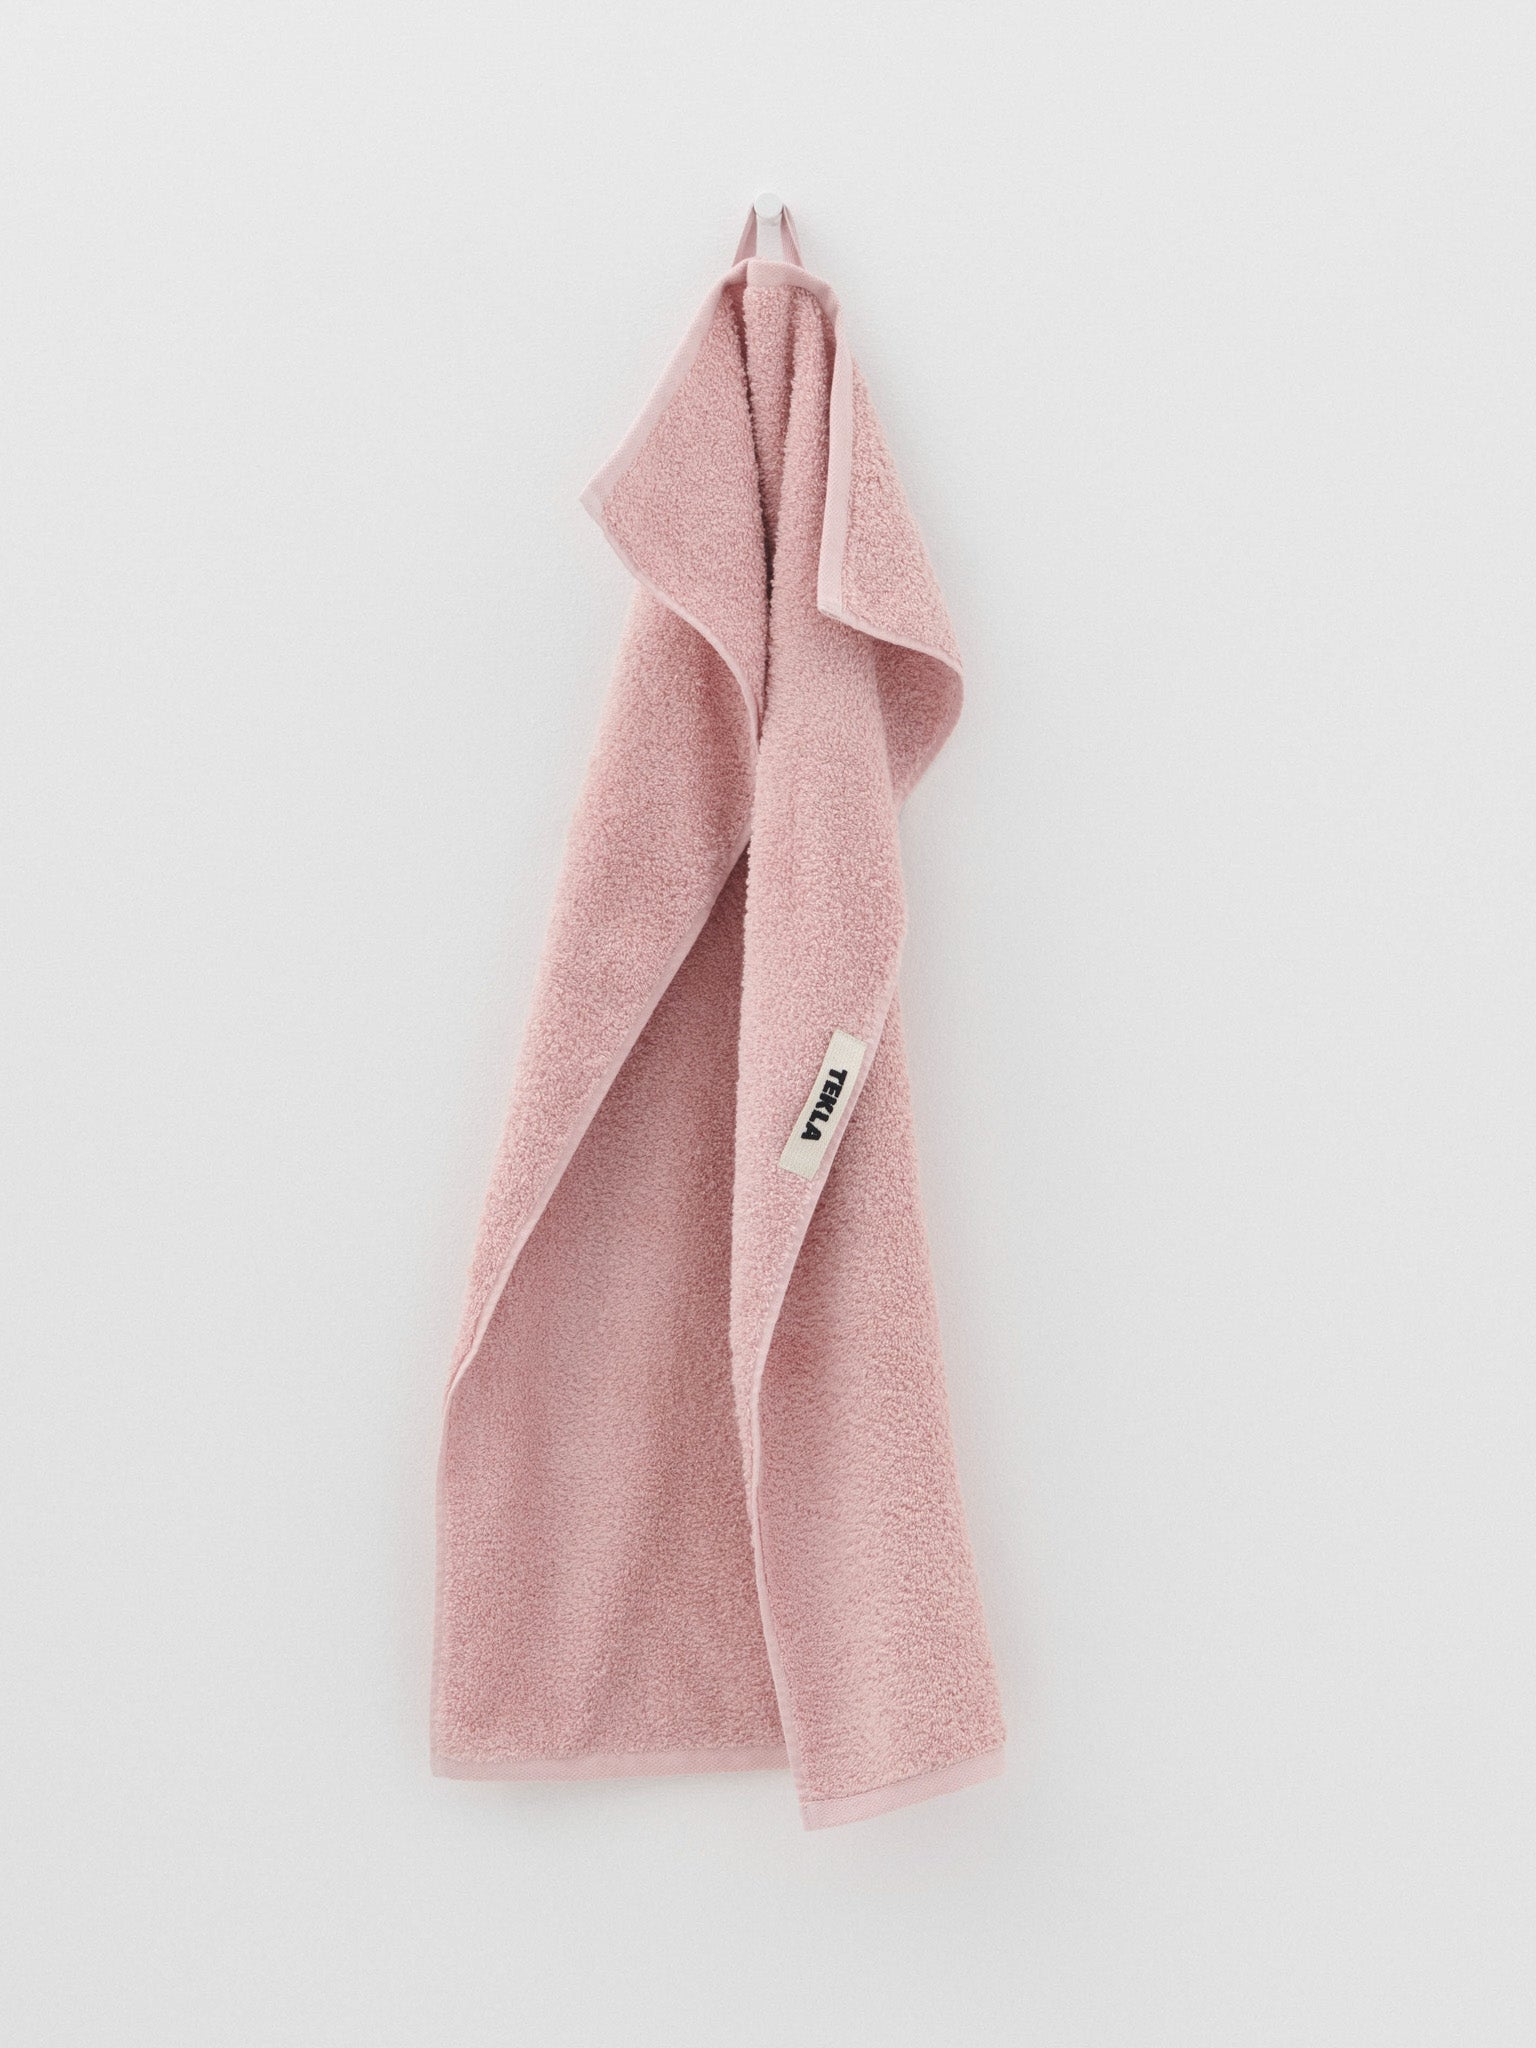 Hand Towel in Shaded Pink